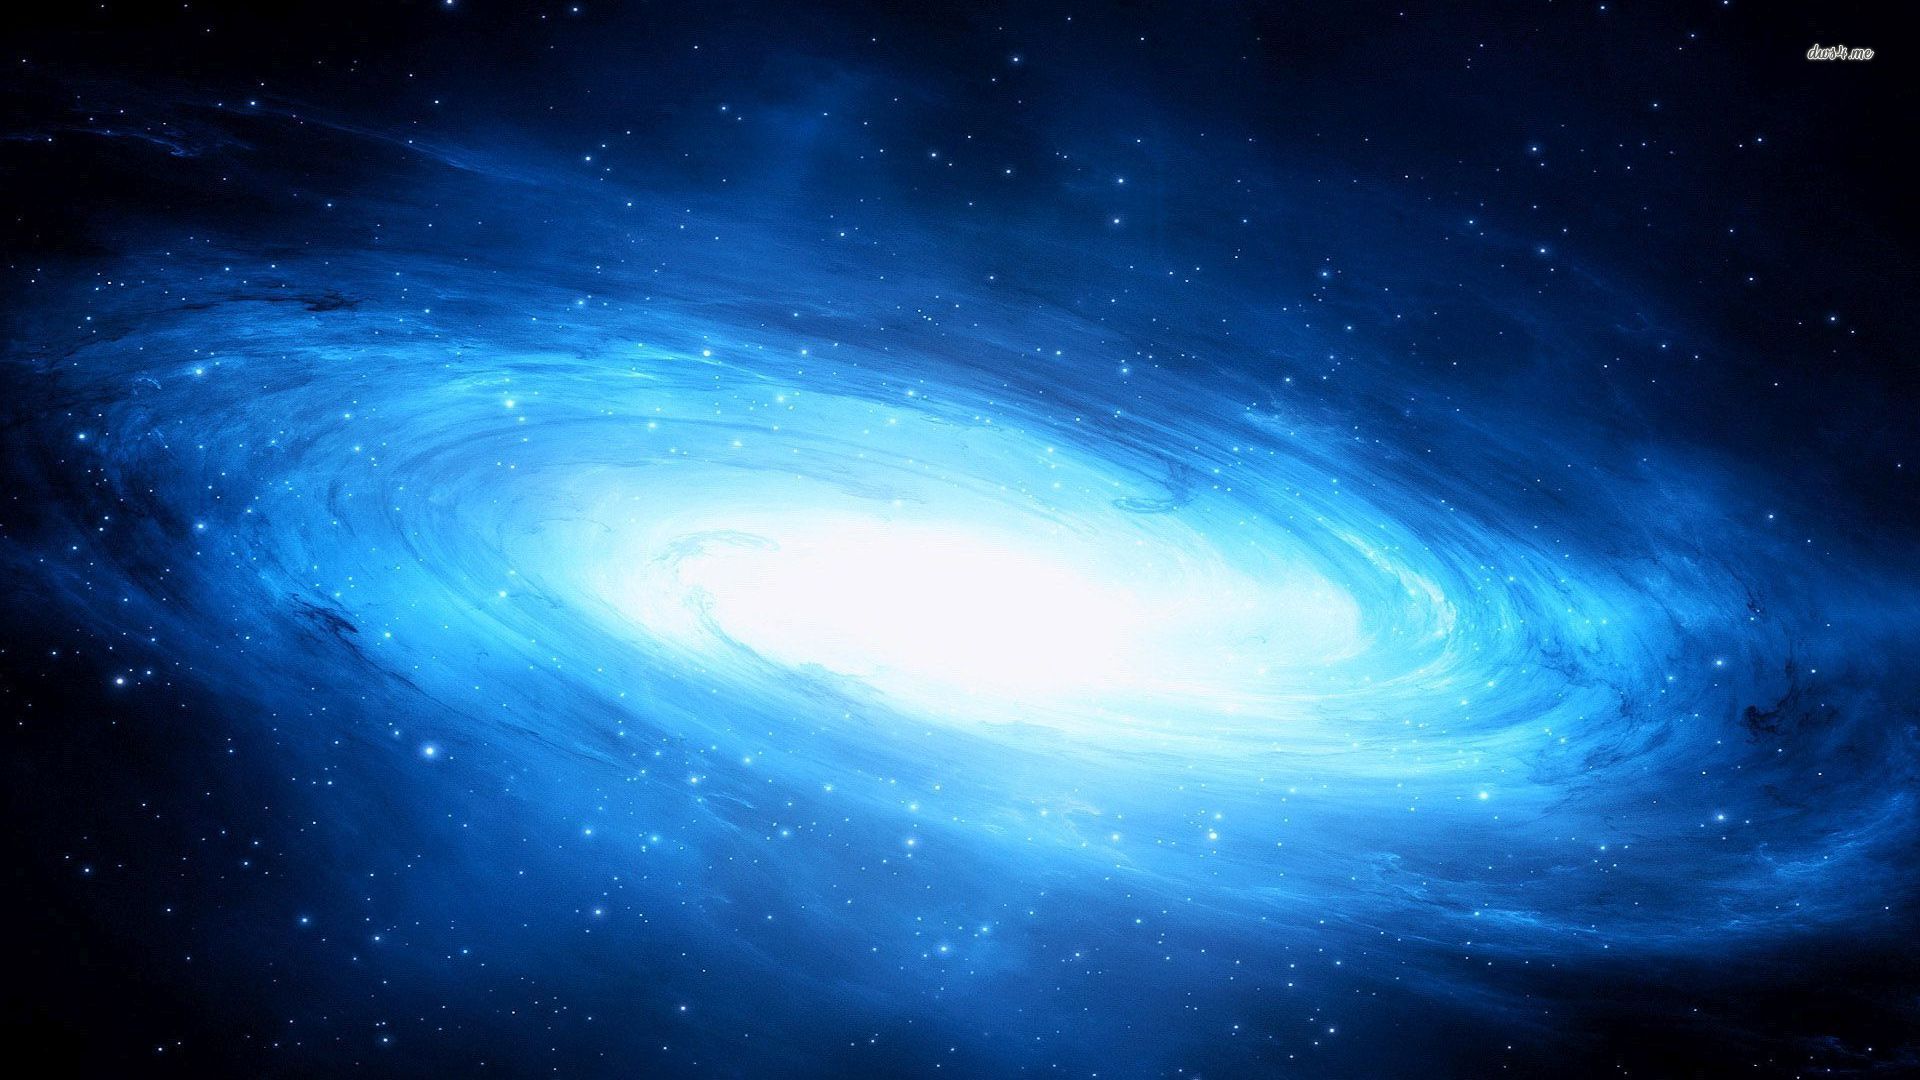 Spiral galaxy wallpaper - Space wallpapers - #29497